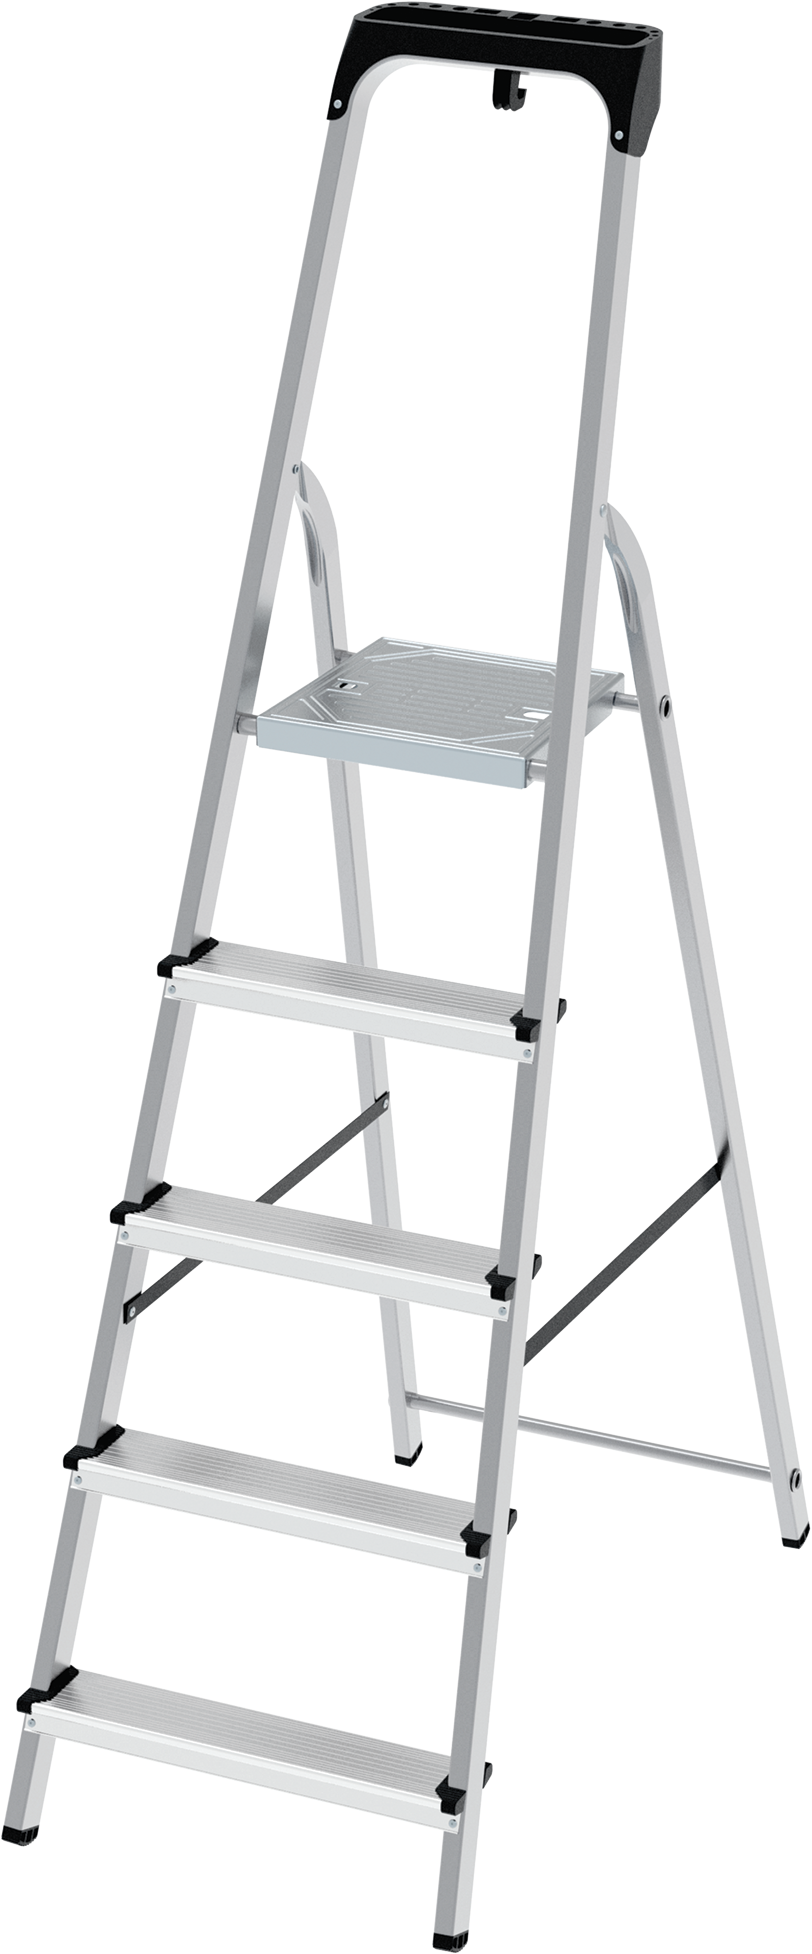 Steel stepladder with aluminum steps and tool tray NV1135